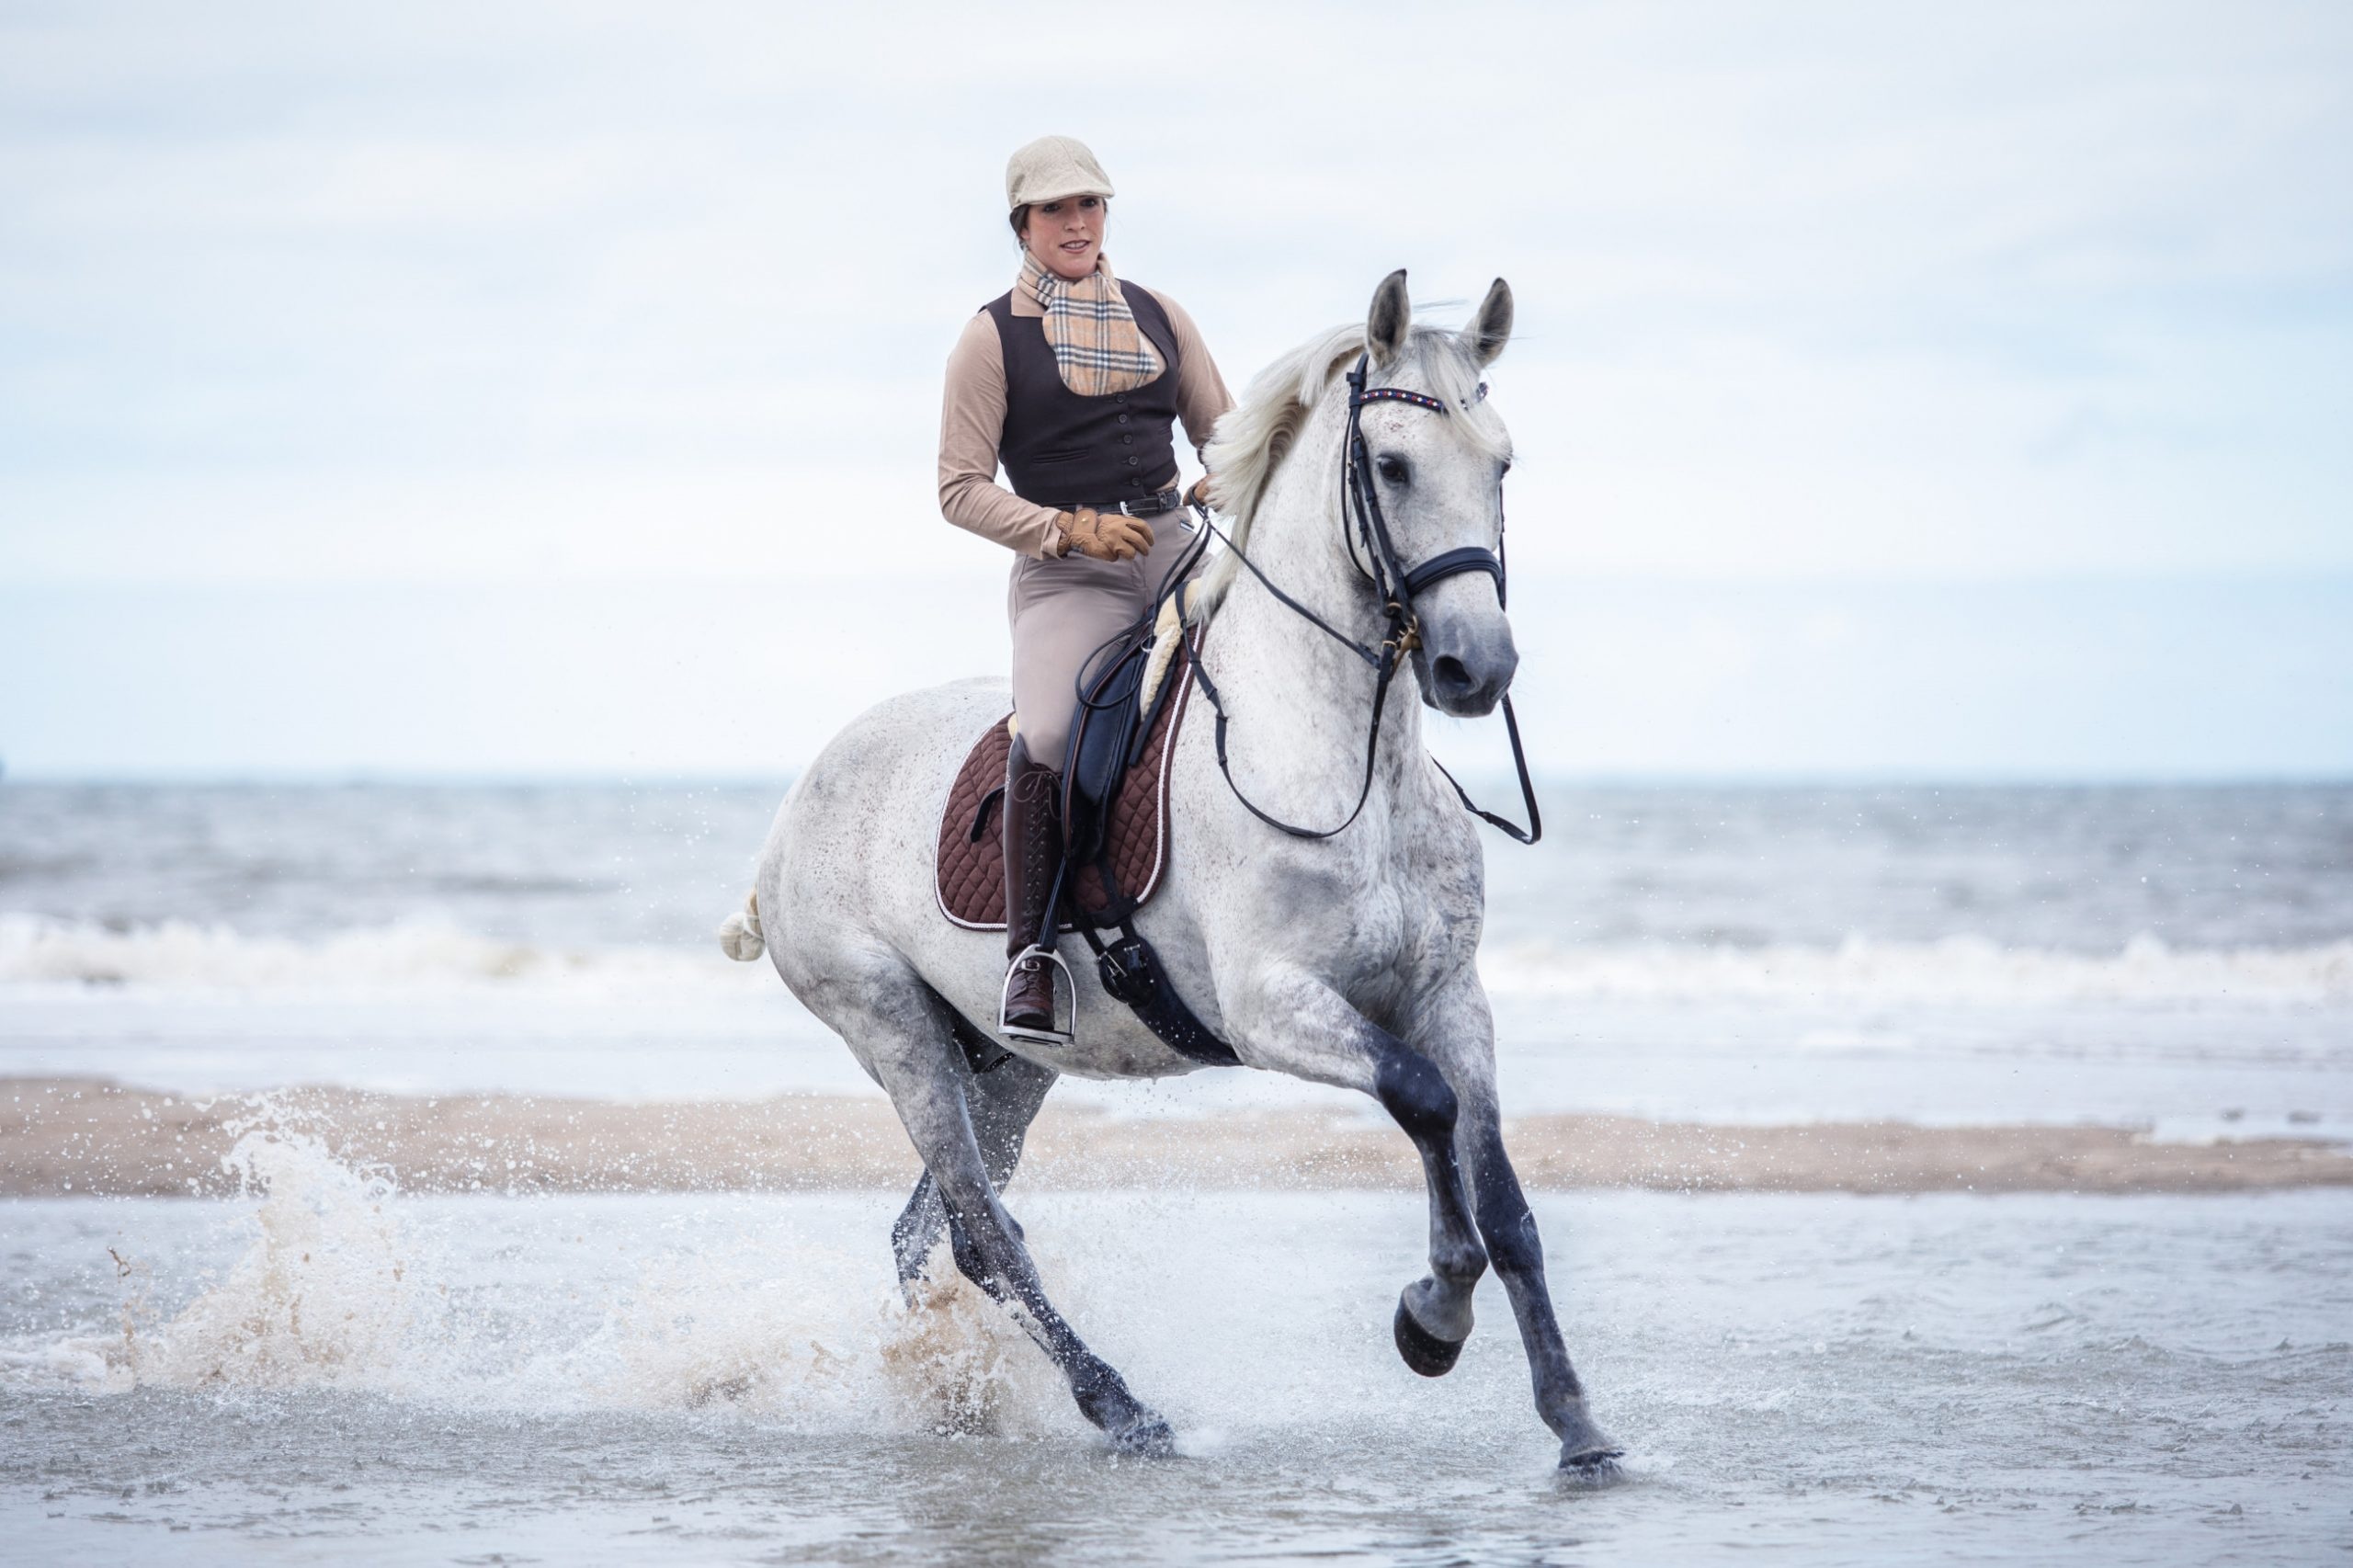 Equitation: Pleasure riding on the beach, Recreational outdoor equestrian activity. 2560x1710 HD Background.